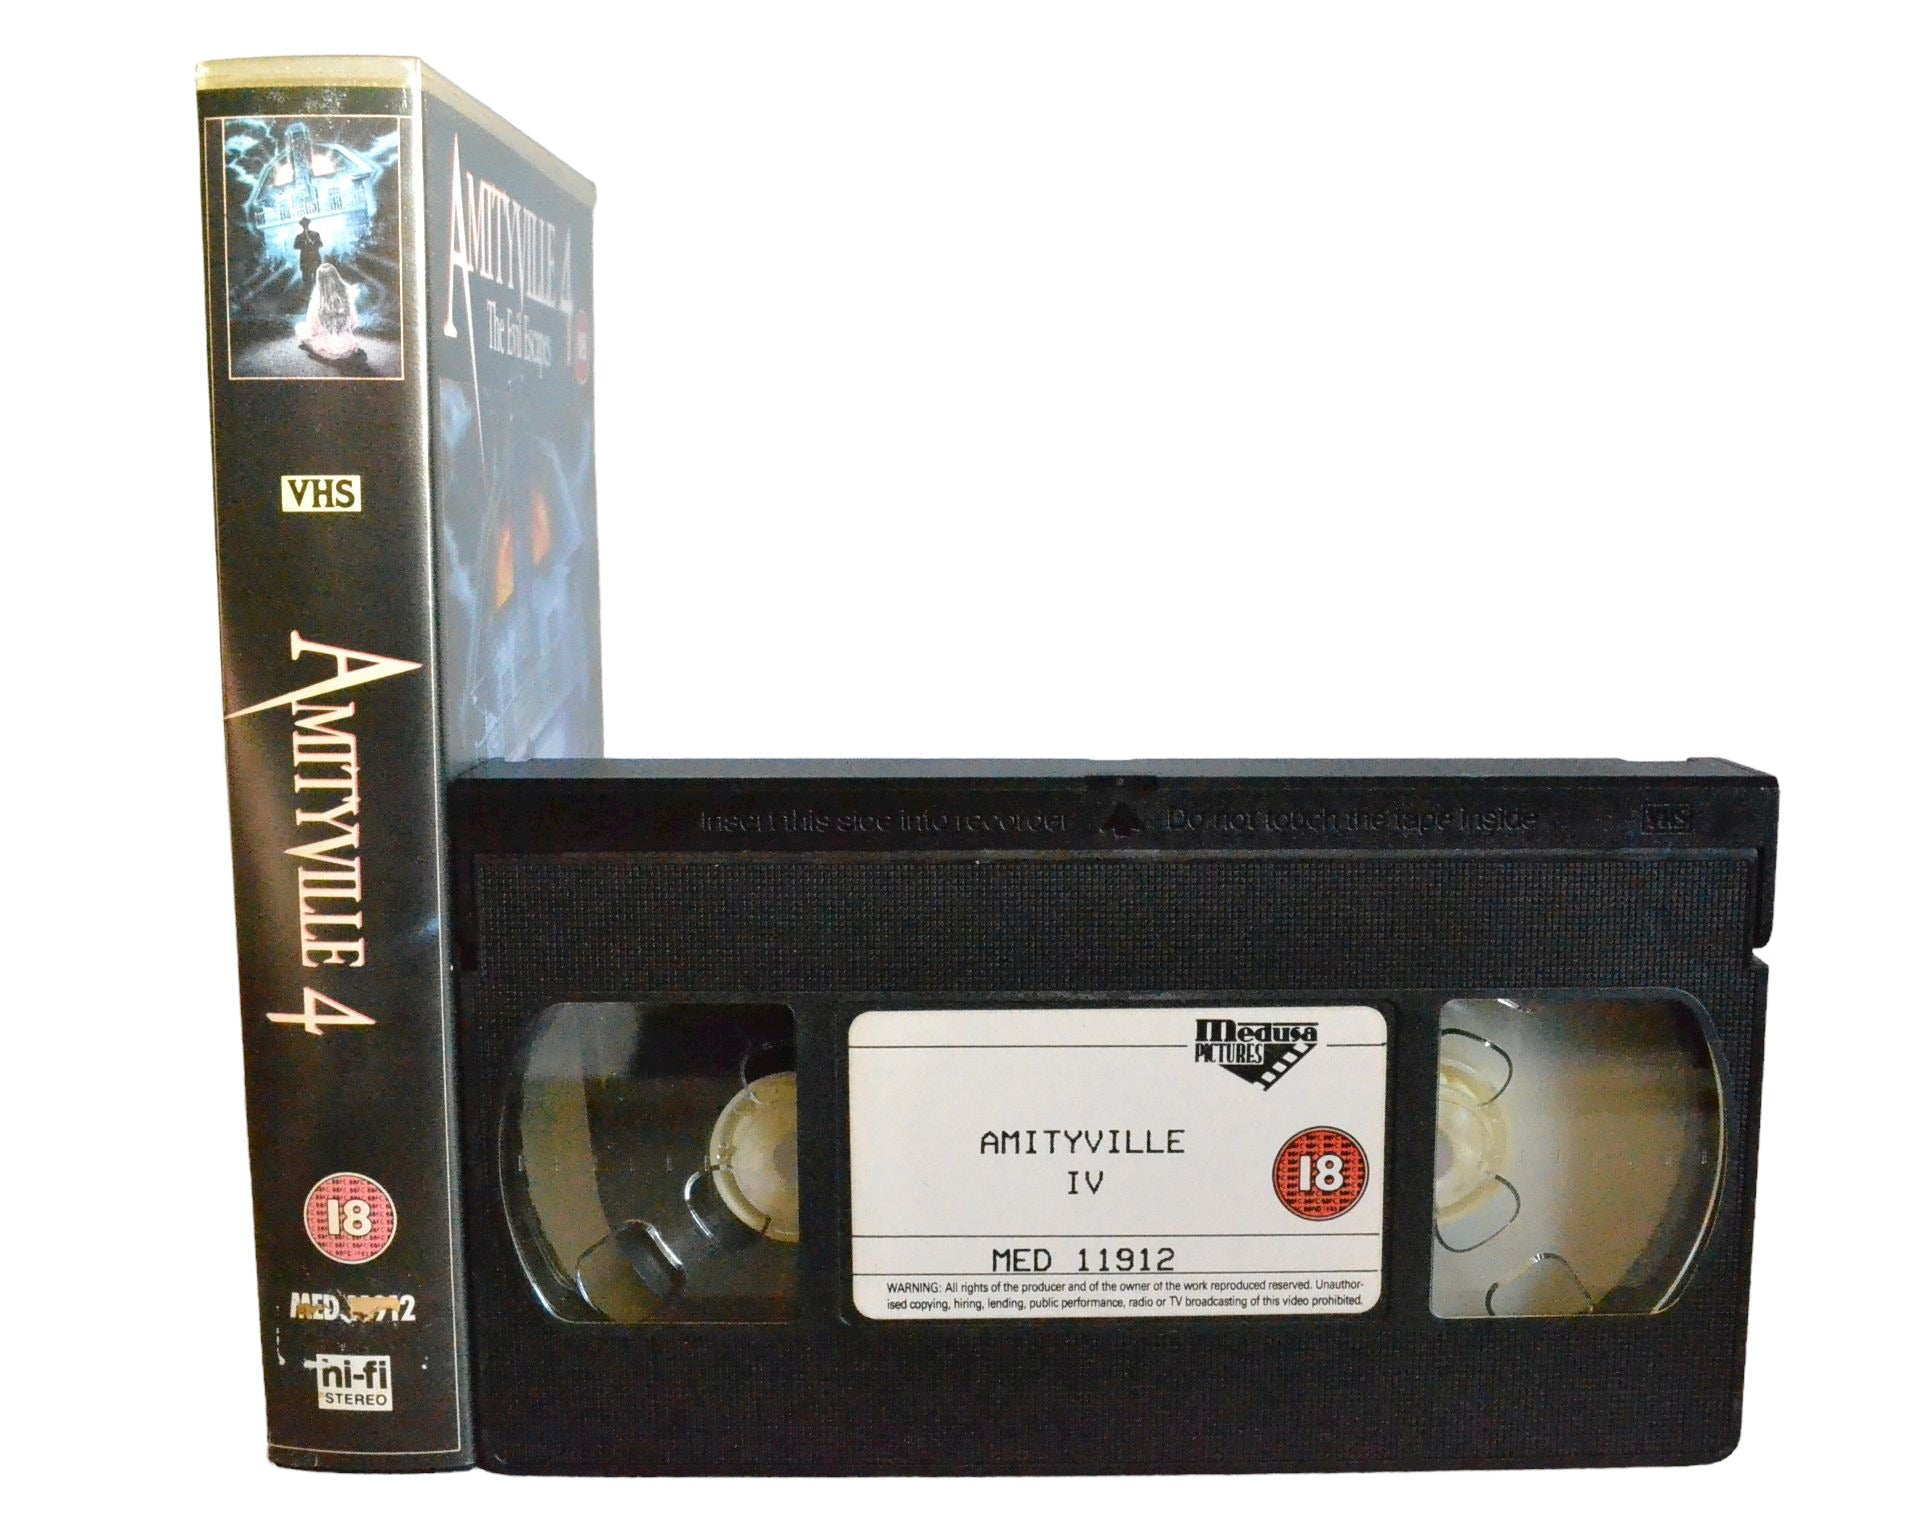 Amityville 4 - Patty Duk - Meduse Pictures - Horror - Pal - VHS-